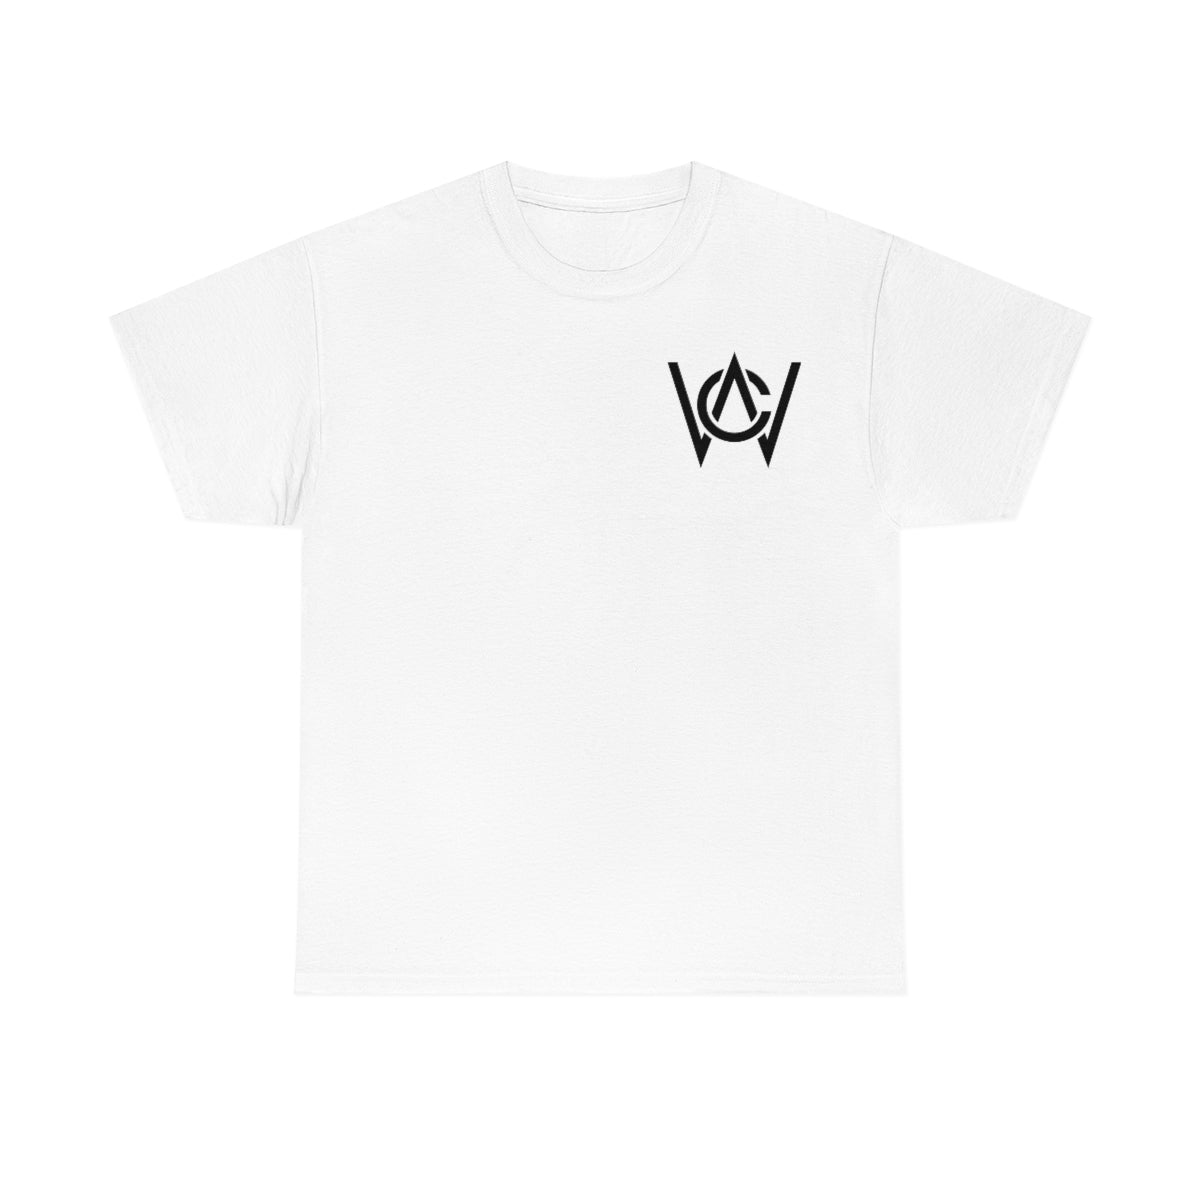 Camille Weiss "CW" Tee